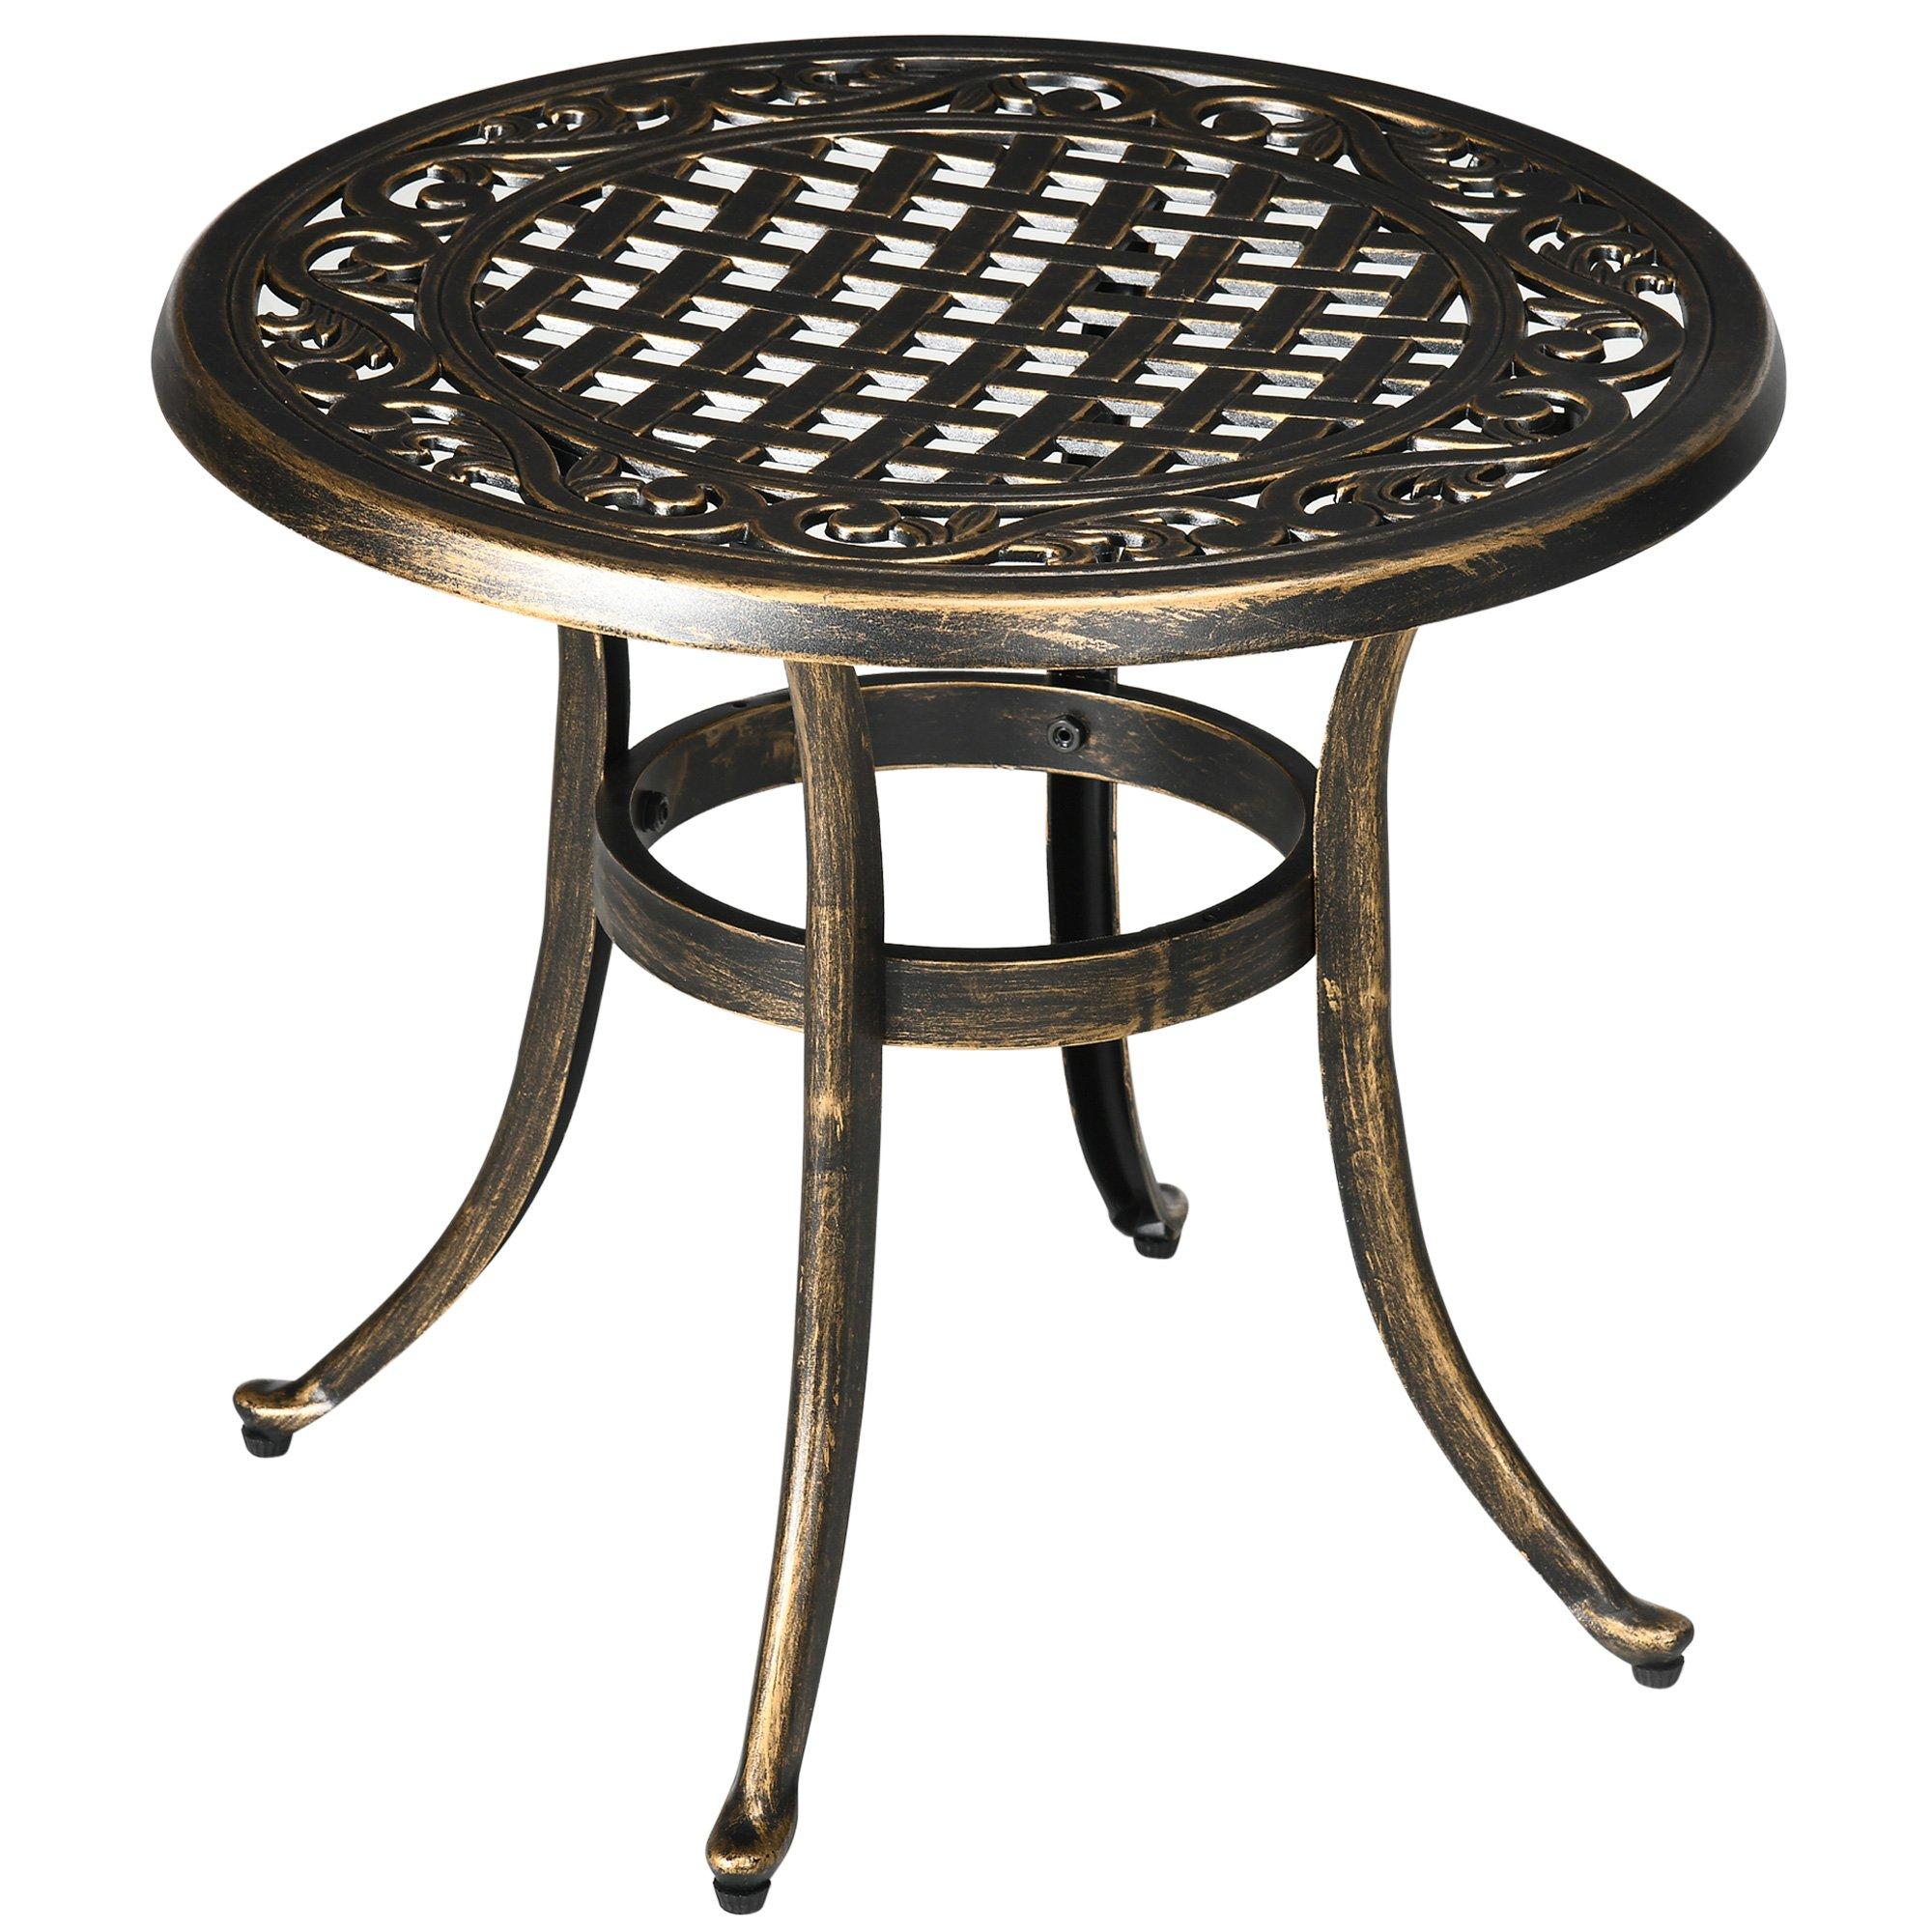 60cm Round Hollow Top Design Side Table with Cast Aluminum Frame